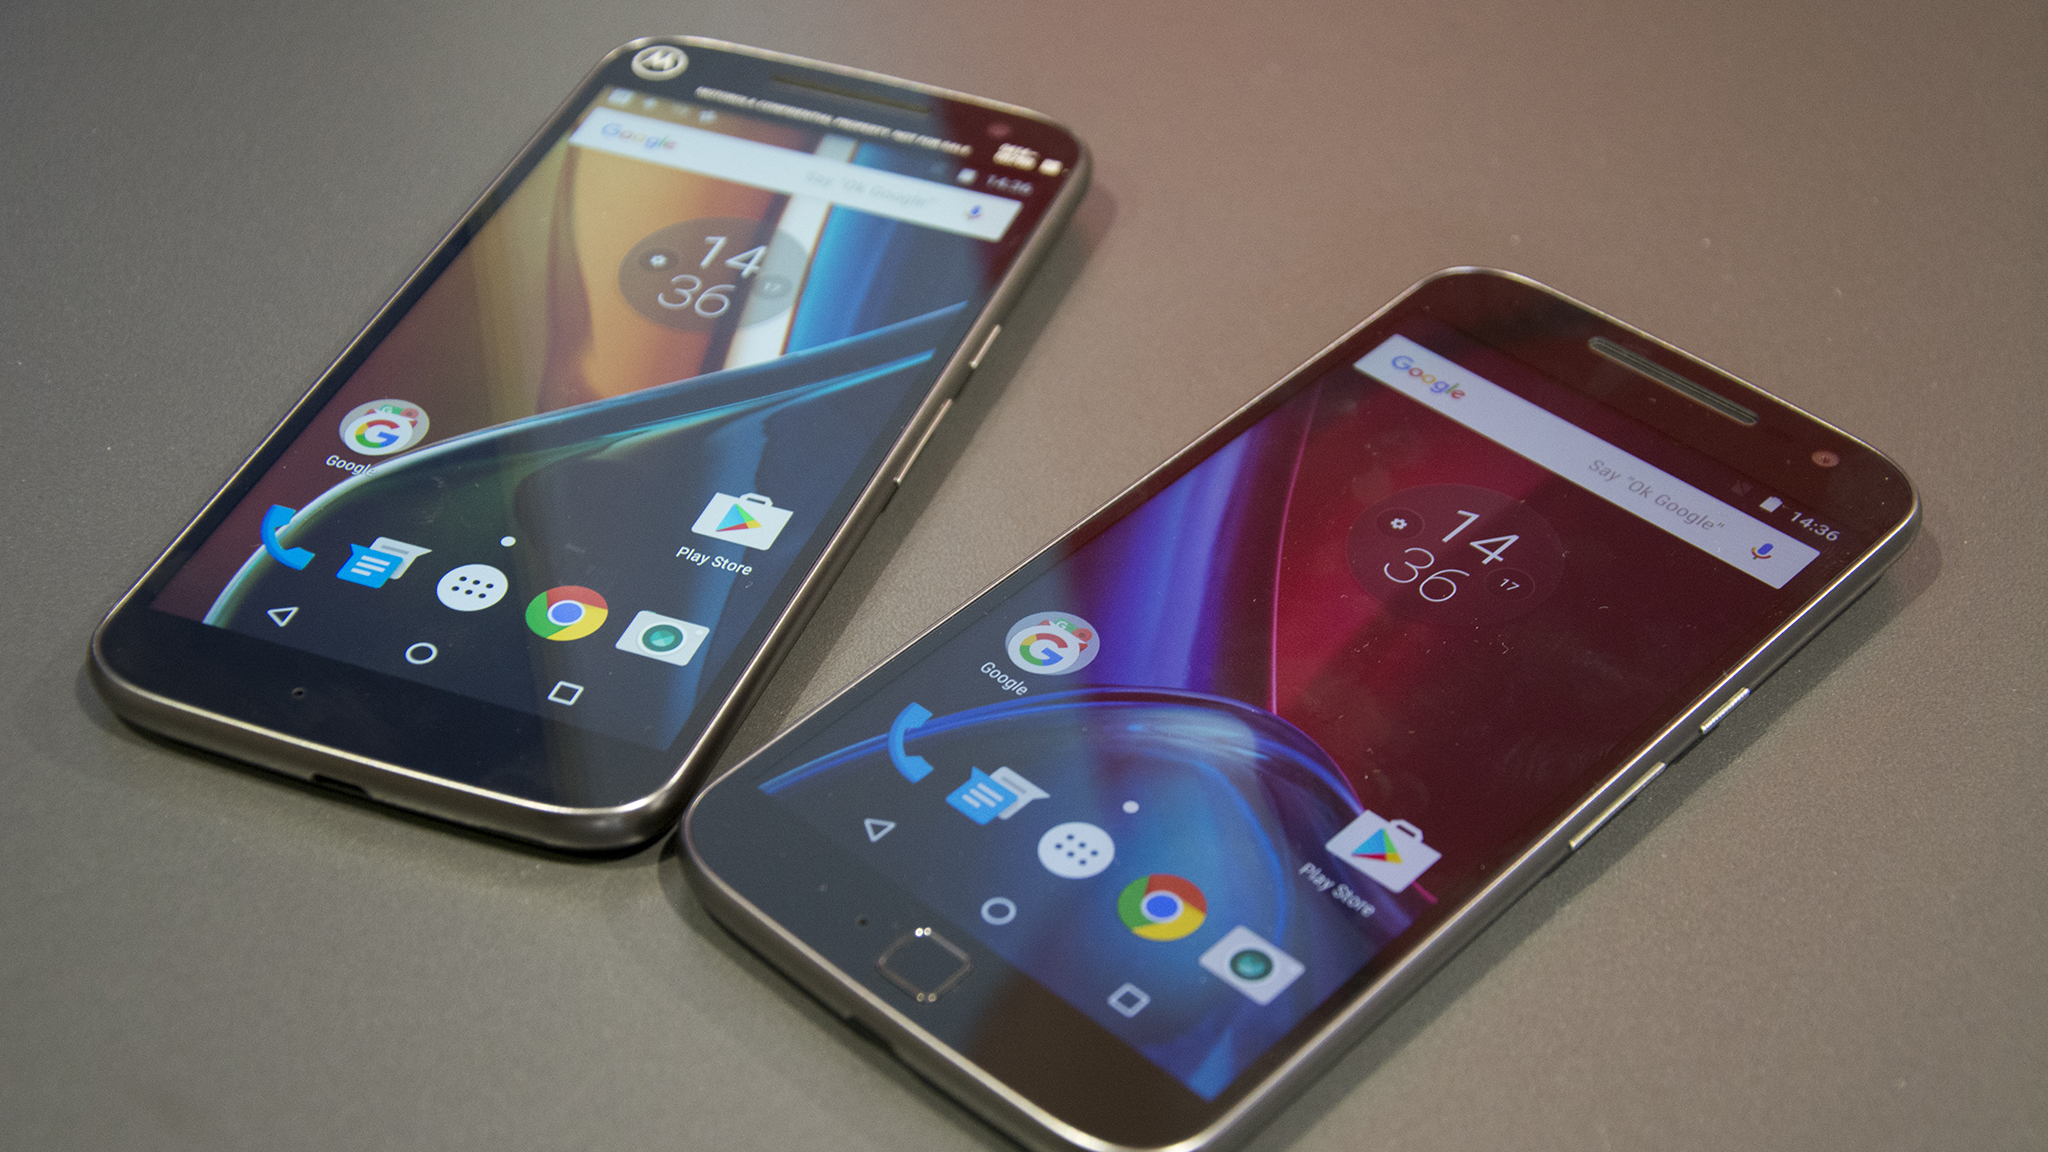 kalf kennisgeving Gouverneur Motorola Moto G4 and G4 Plus review (Hands-on): Don't call it the Moto G ( 4th Gen)